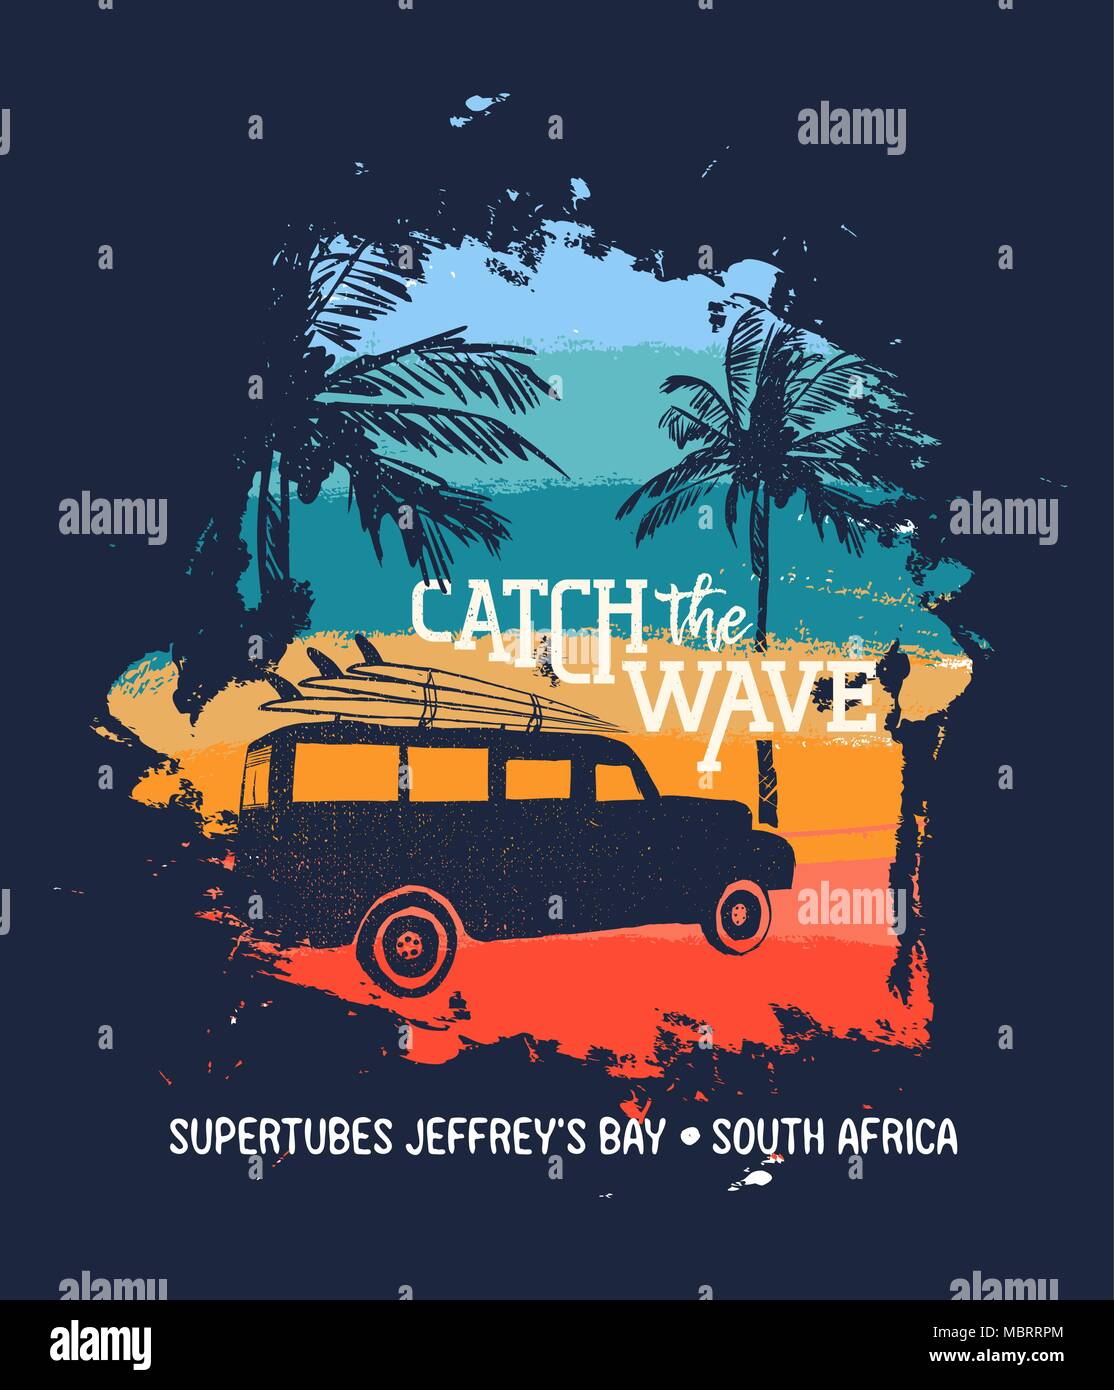 Summer vacation in supertubes jeffreys bay, south africa. Holiday illustration with text quote, car and surf boards on tropical beach. Vintage texture Stock Vector